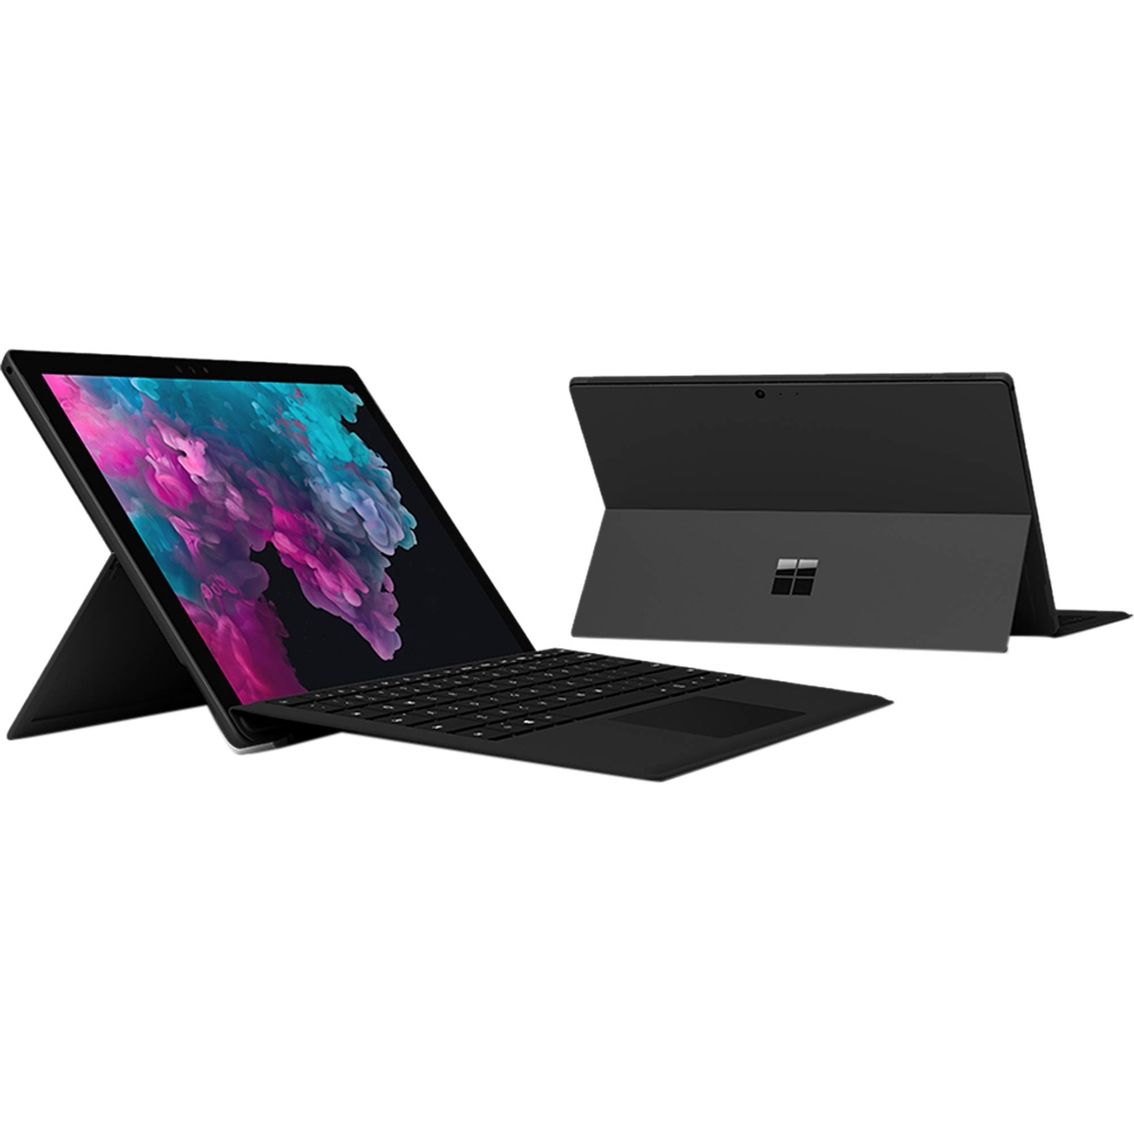 Microsoft Surface Pro 6 12.3 in. Touchscreen Intel i7 16GB RAM 512GB SSD Tablet - Image 7 of 7